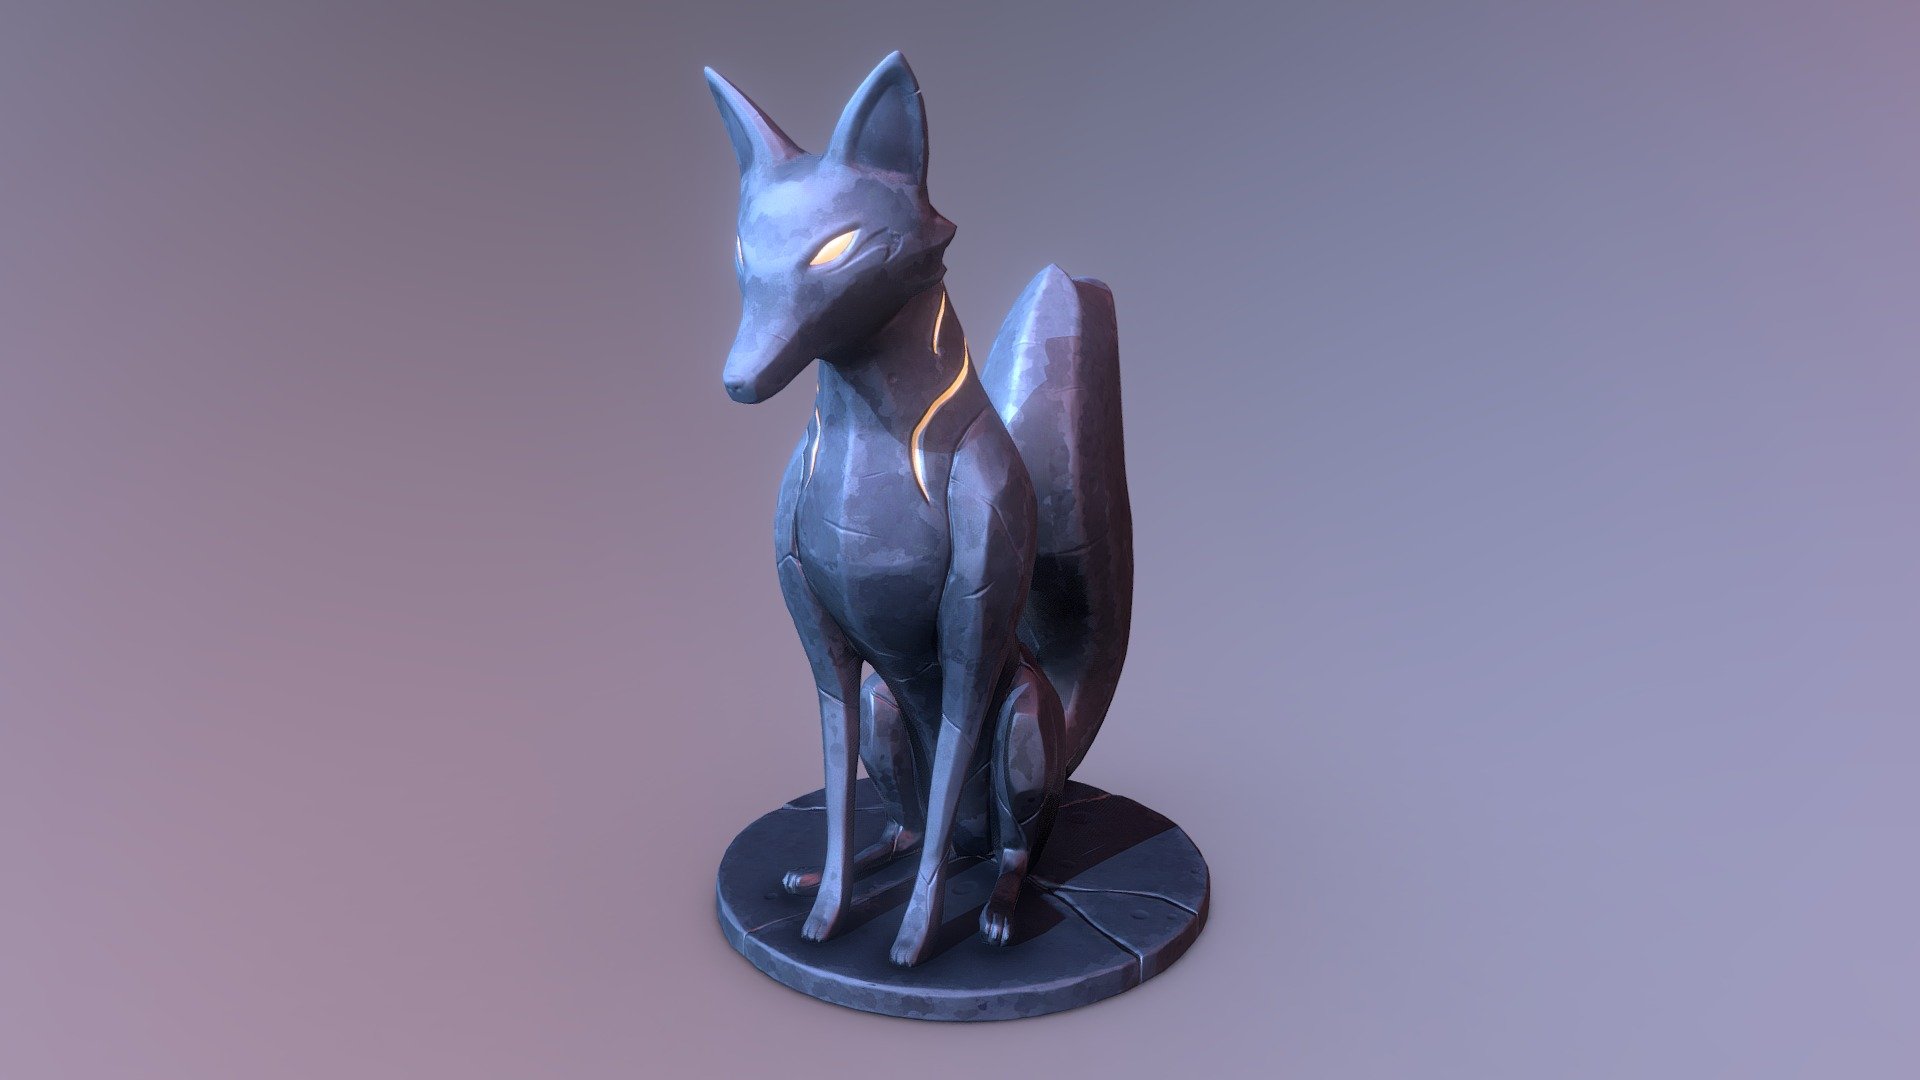 Fox statue I made for a stylized environment. I was focused on creating a scene in the &ldquo;Orb Style